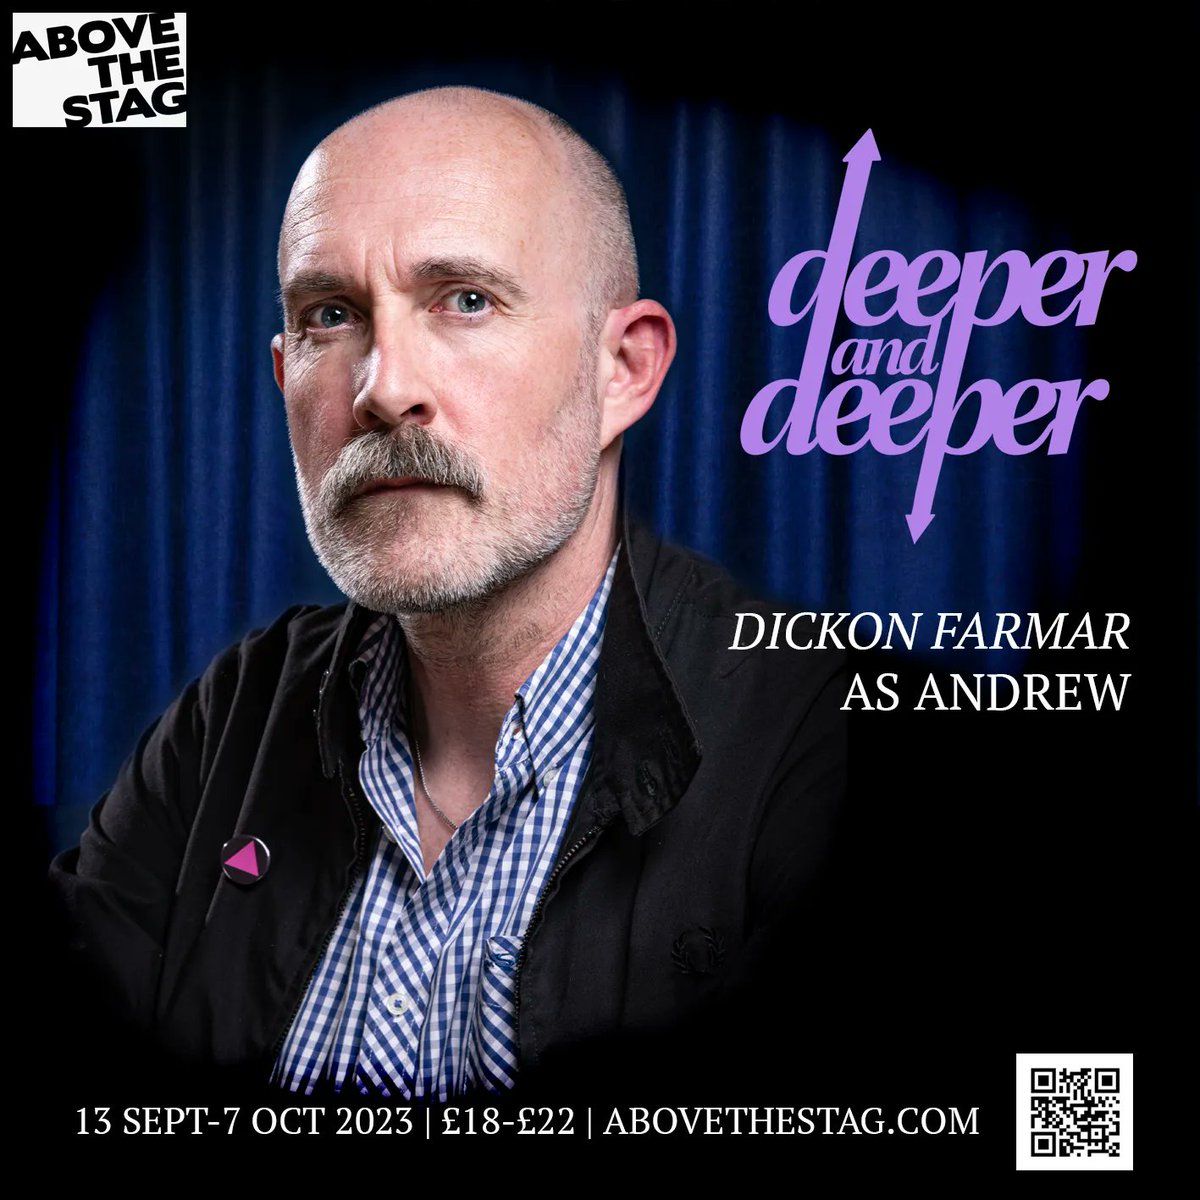 Today is the final day of rehearsals of week one for Deeper and Deeper! Returning to the role of Andrew is Dickon Farmar. Seats are selling fast! Abovethestag.com